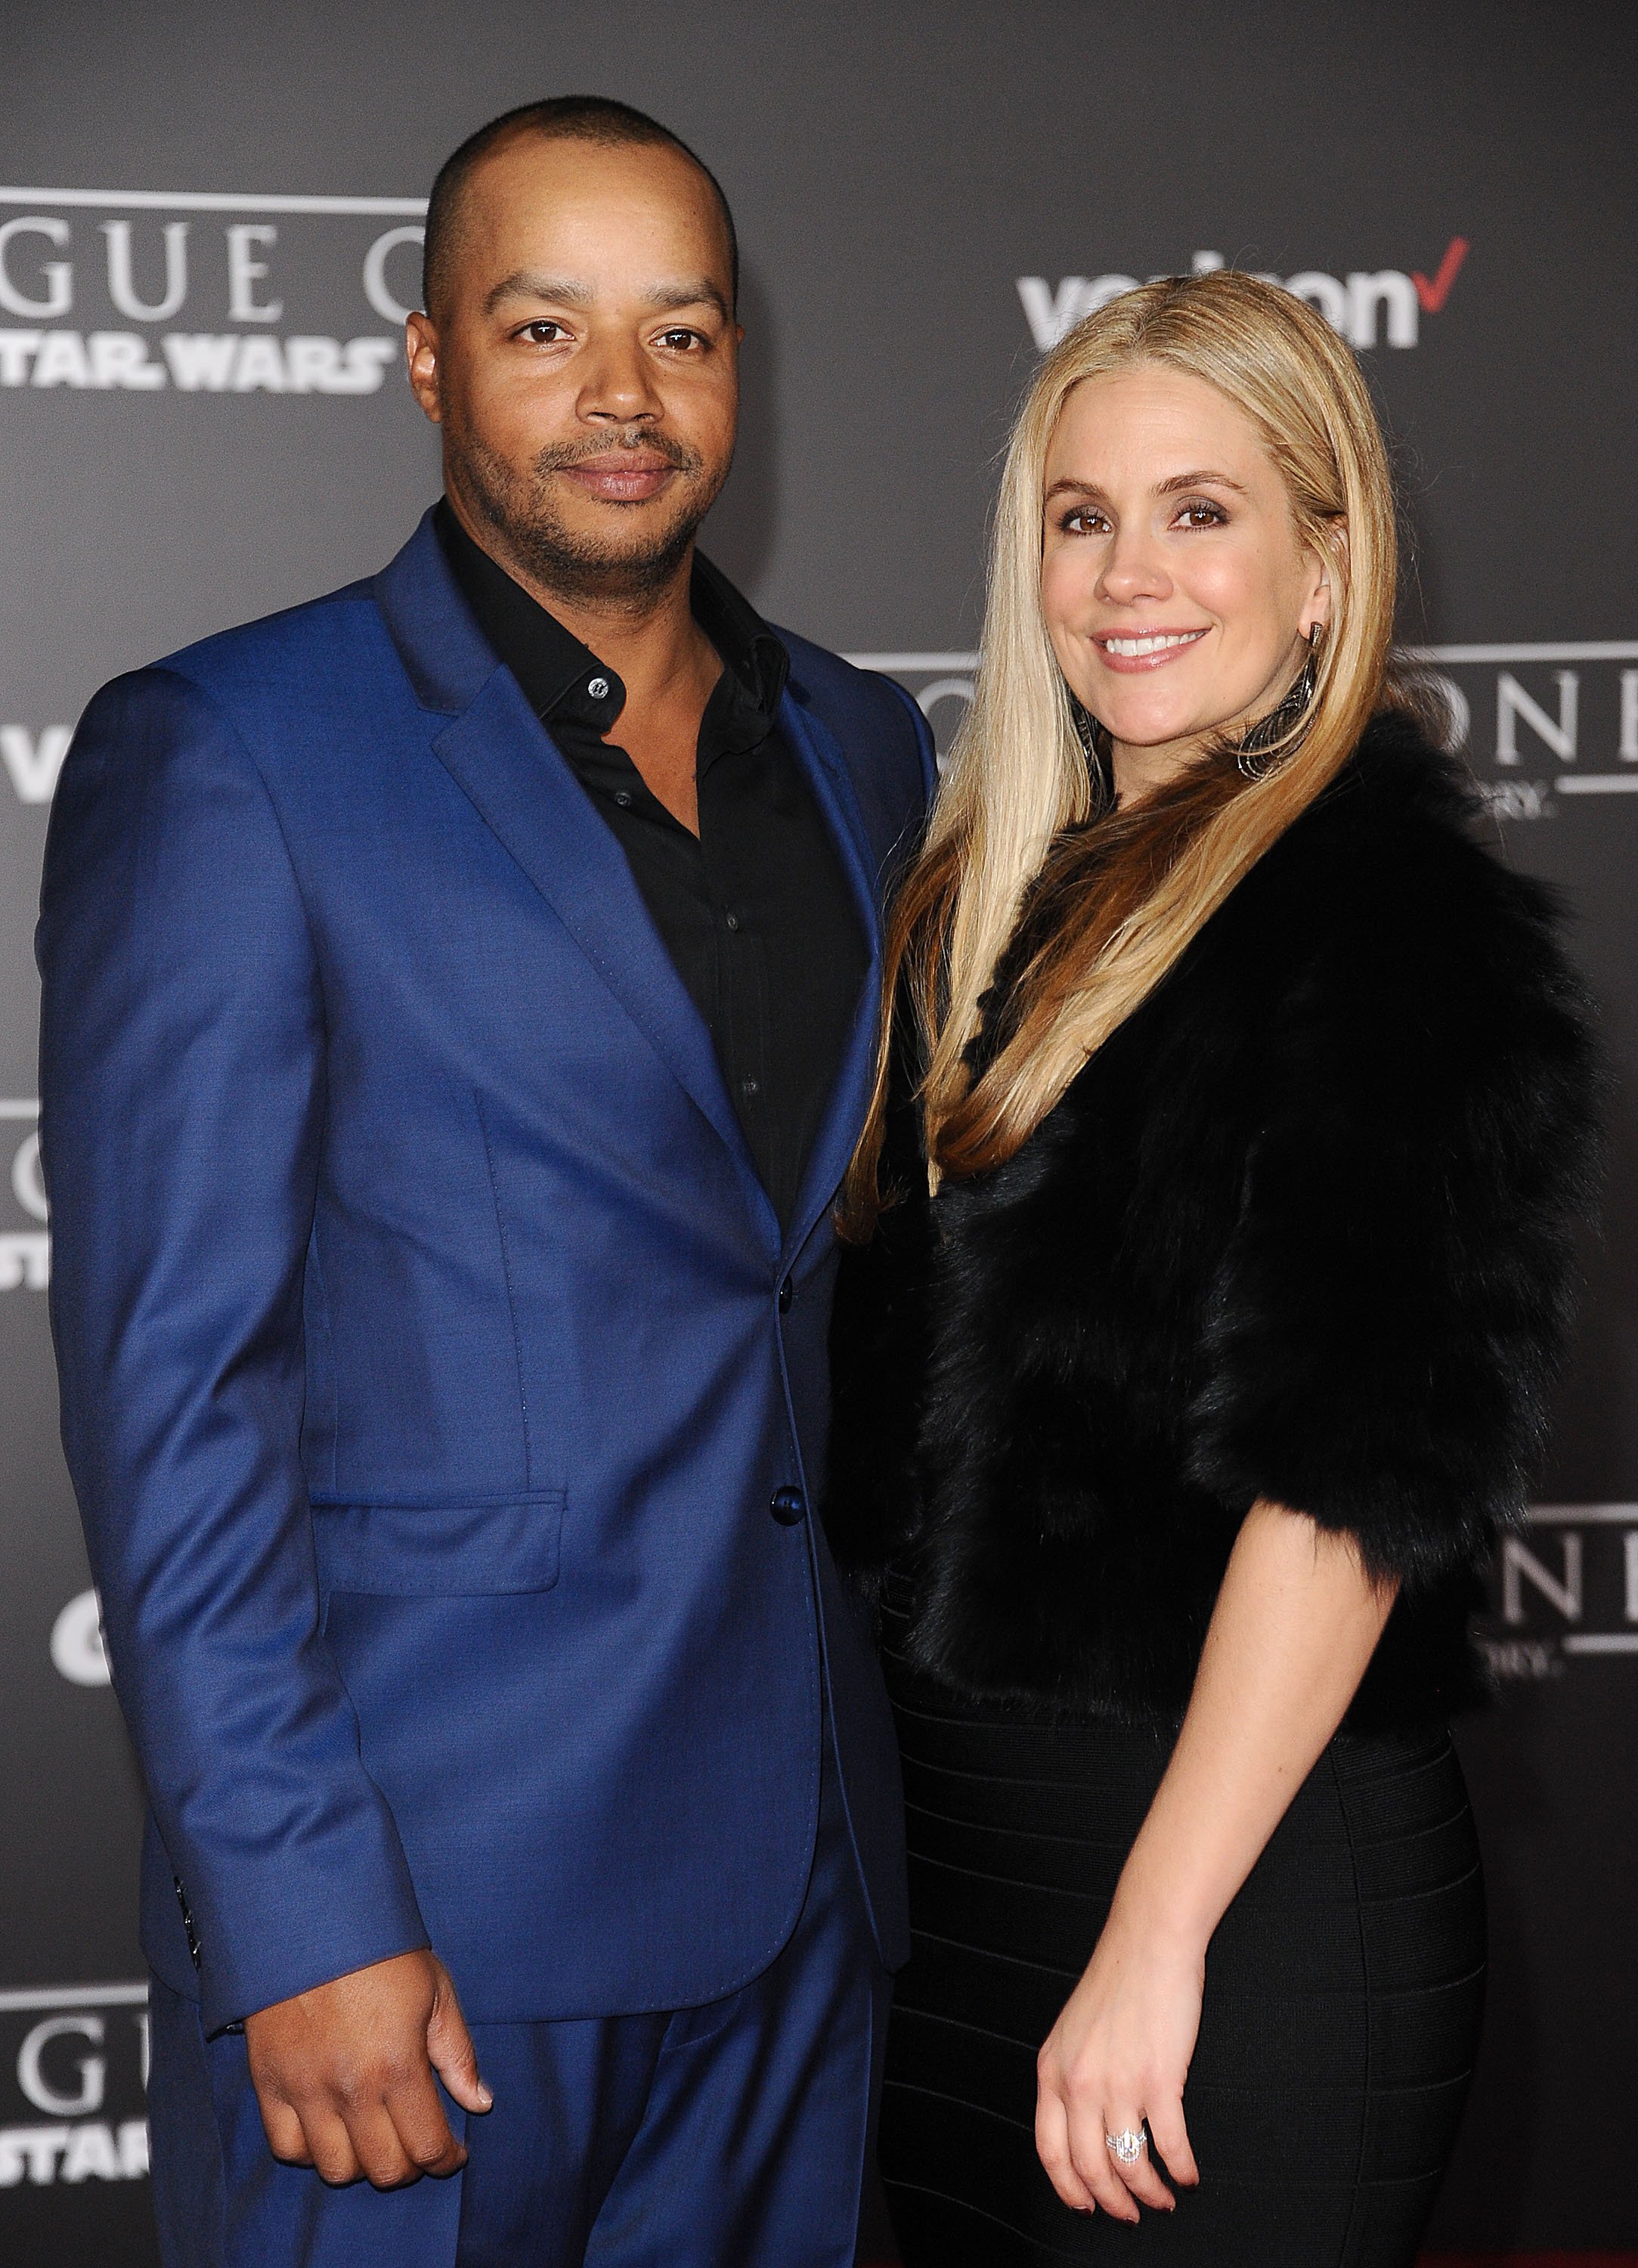 Donald Faison and CaCee Cobb at the premiere of "Rogue One: A Star Wars Story" in Hollywood on December 10, 2016 | Source: Getty Images